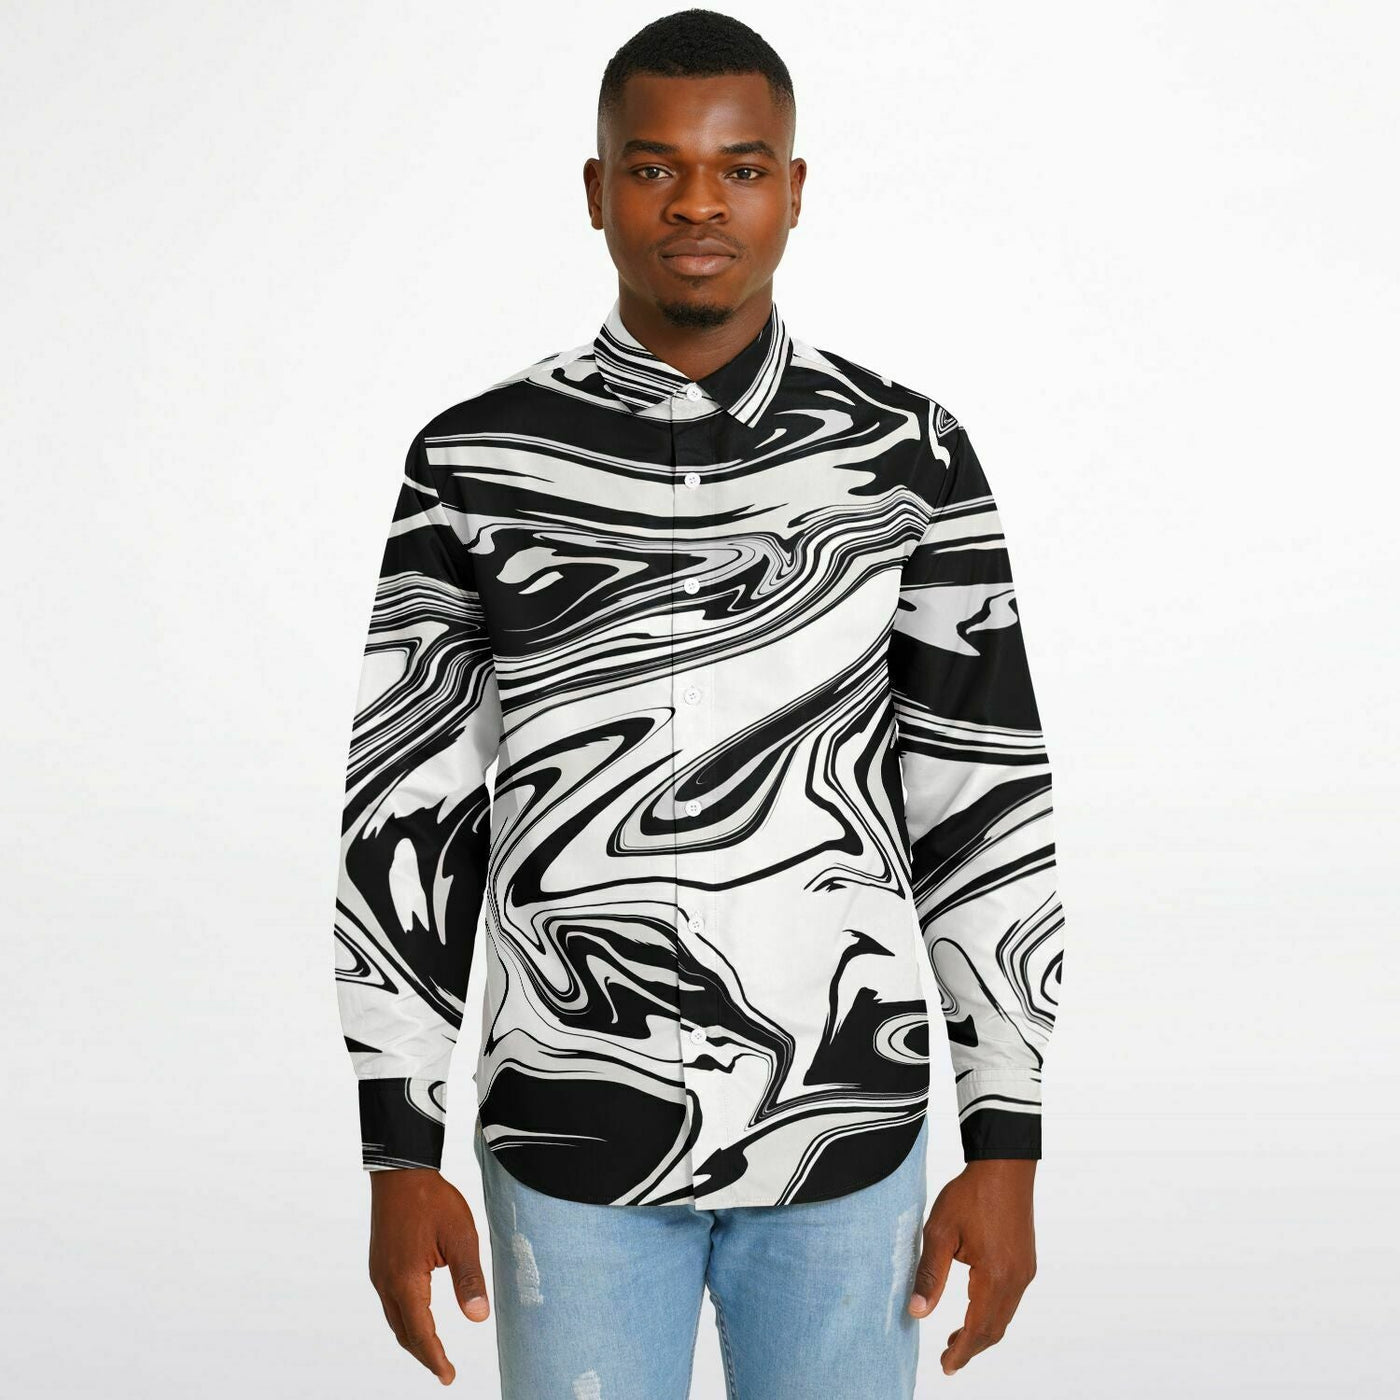 Wavy Black & White Abstract Psychedelic Pattern Long Sleeve Button Down Shirt